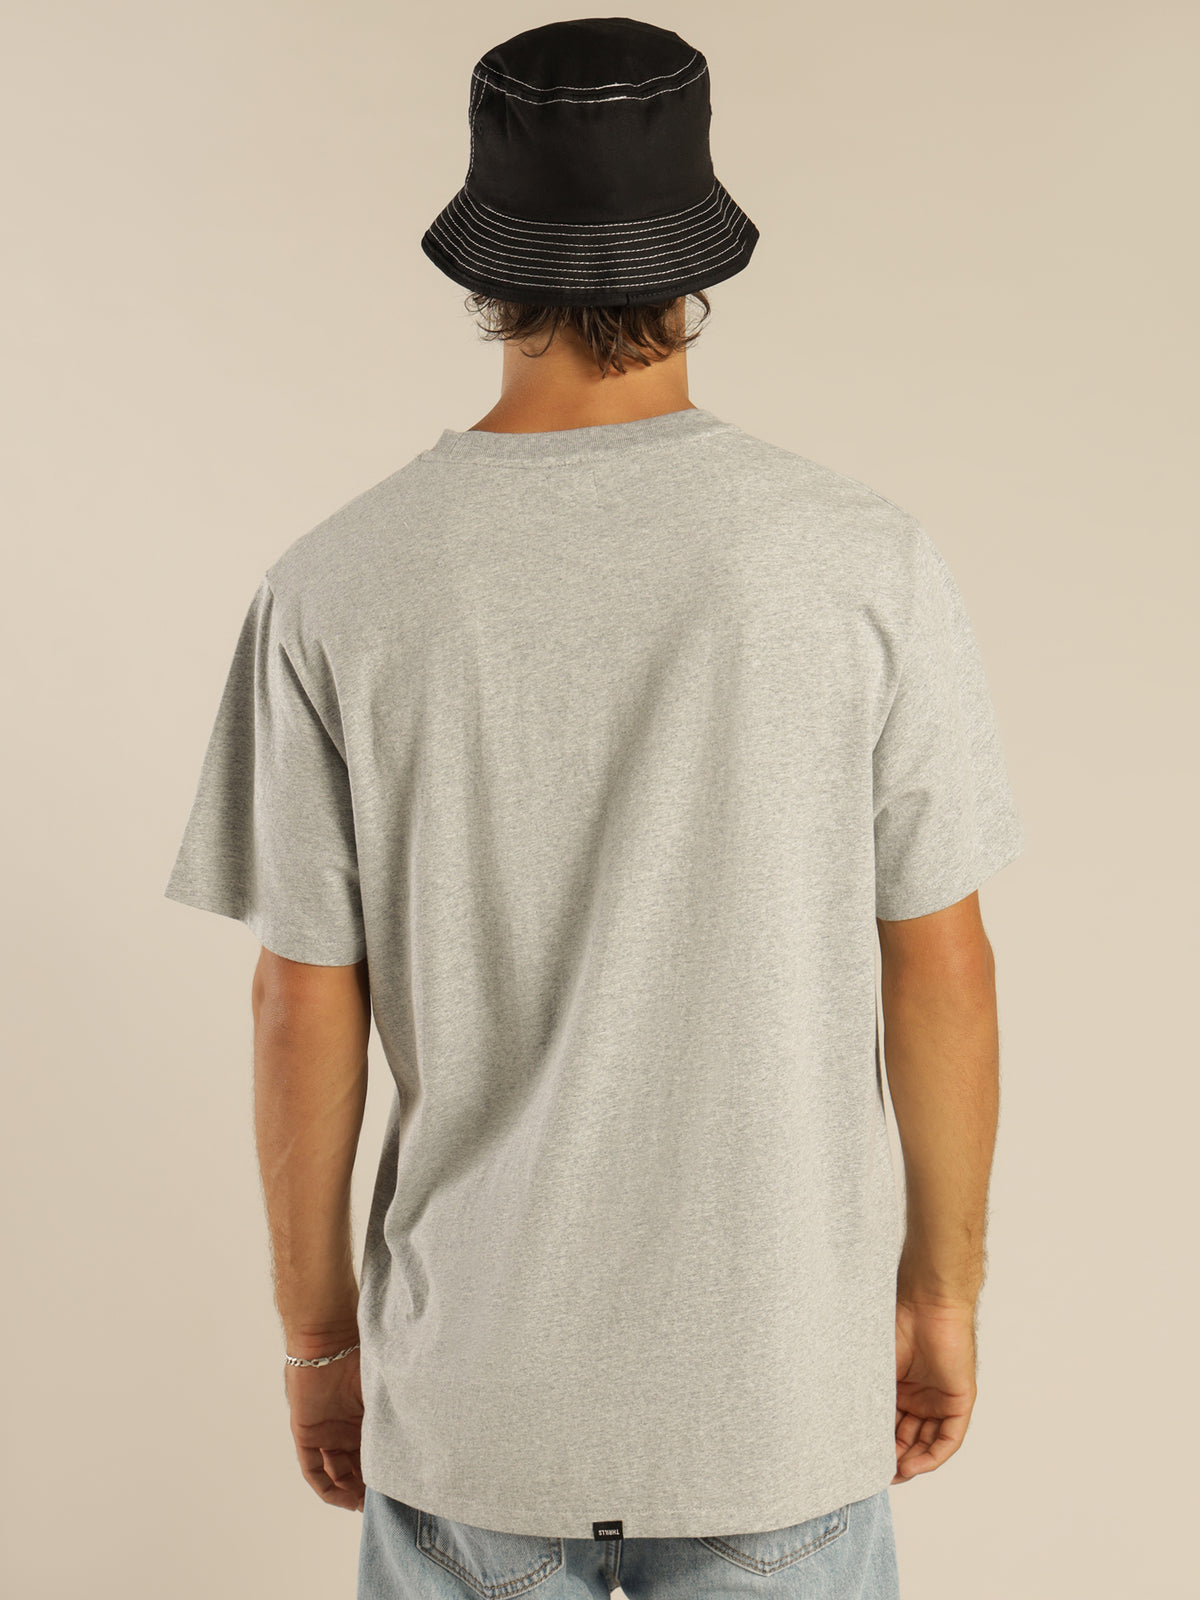 Roadhouse Merch Fit T-Shirt in Grey Marle